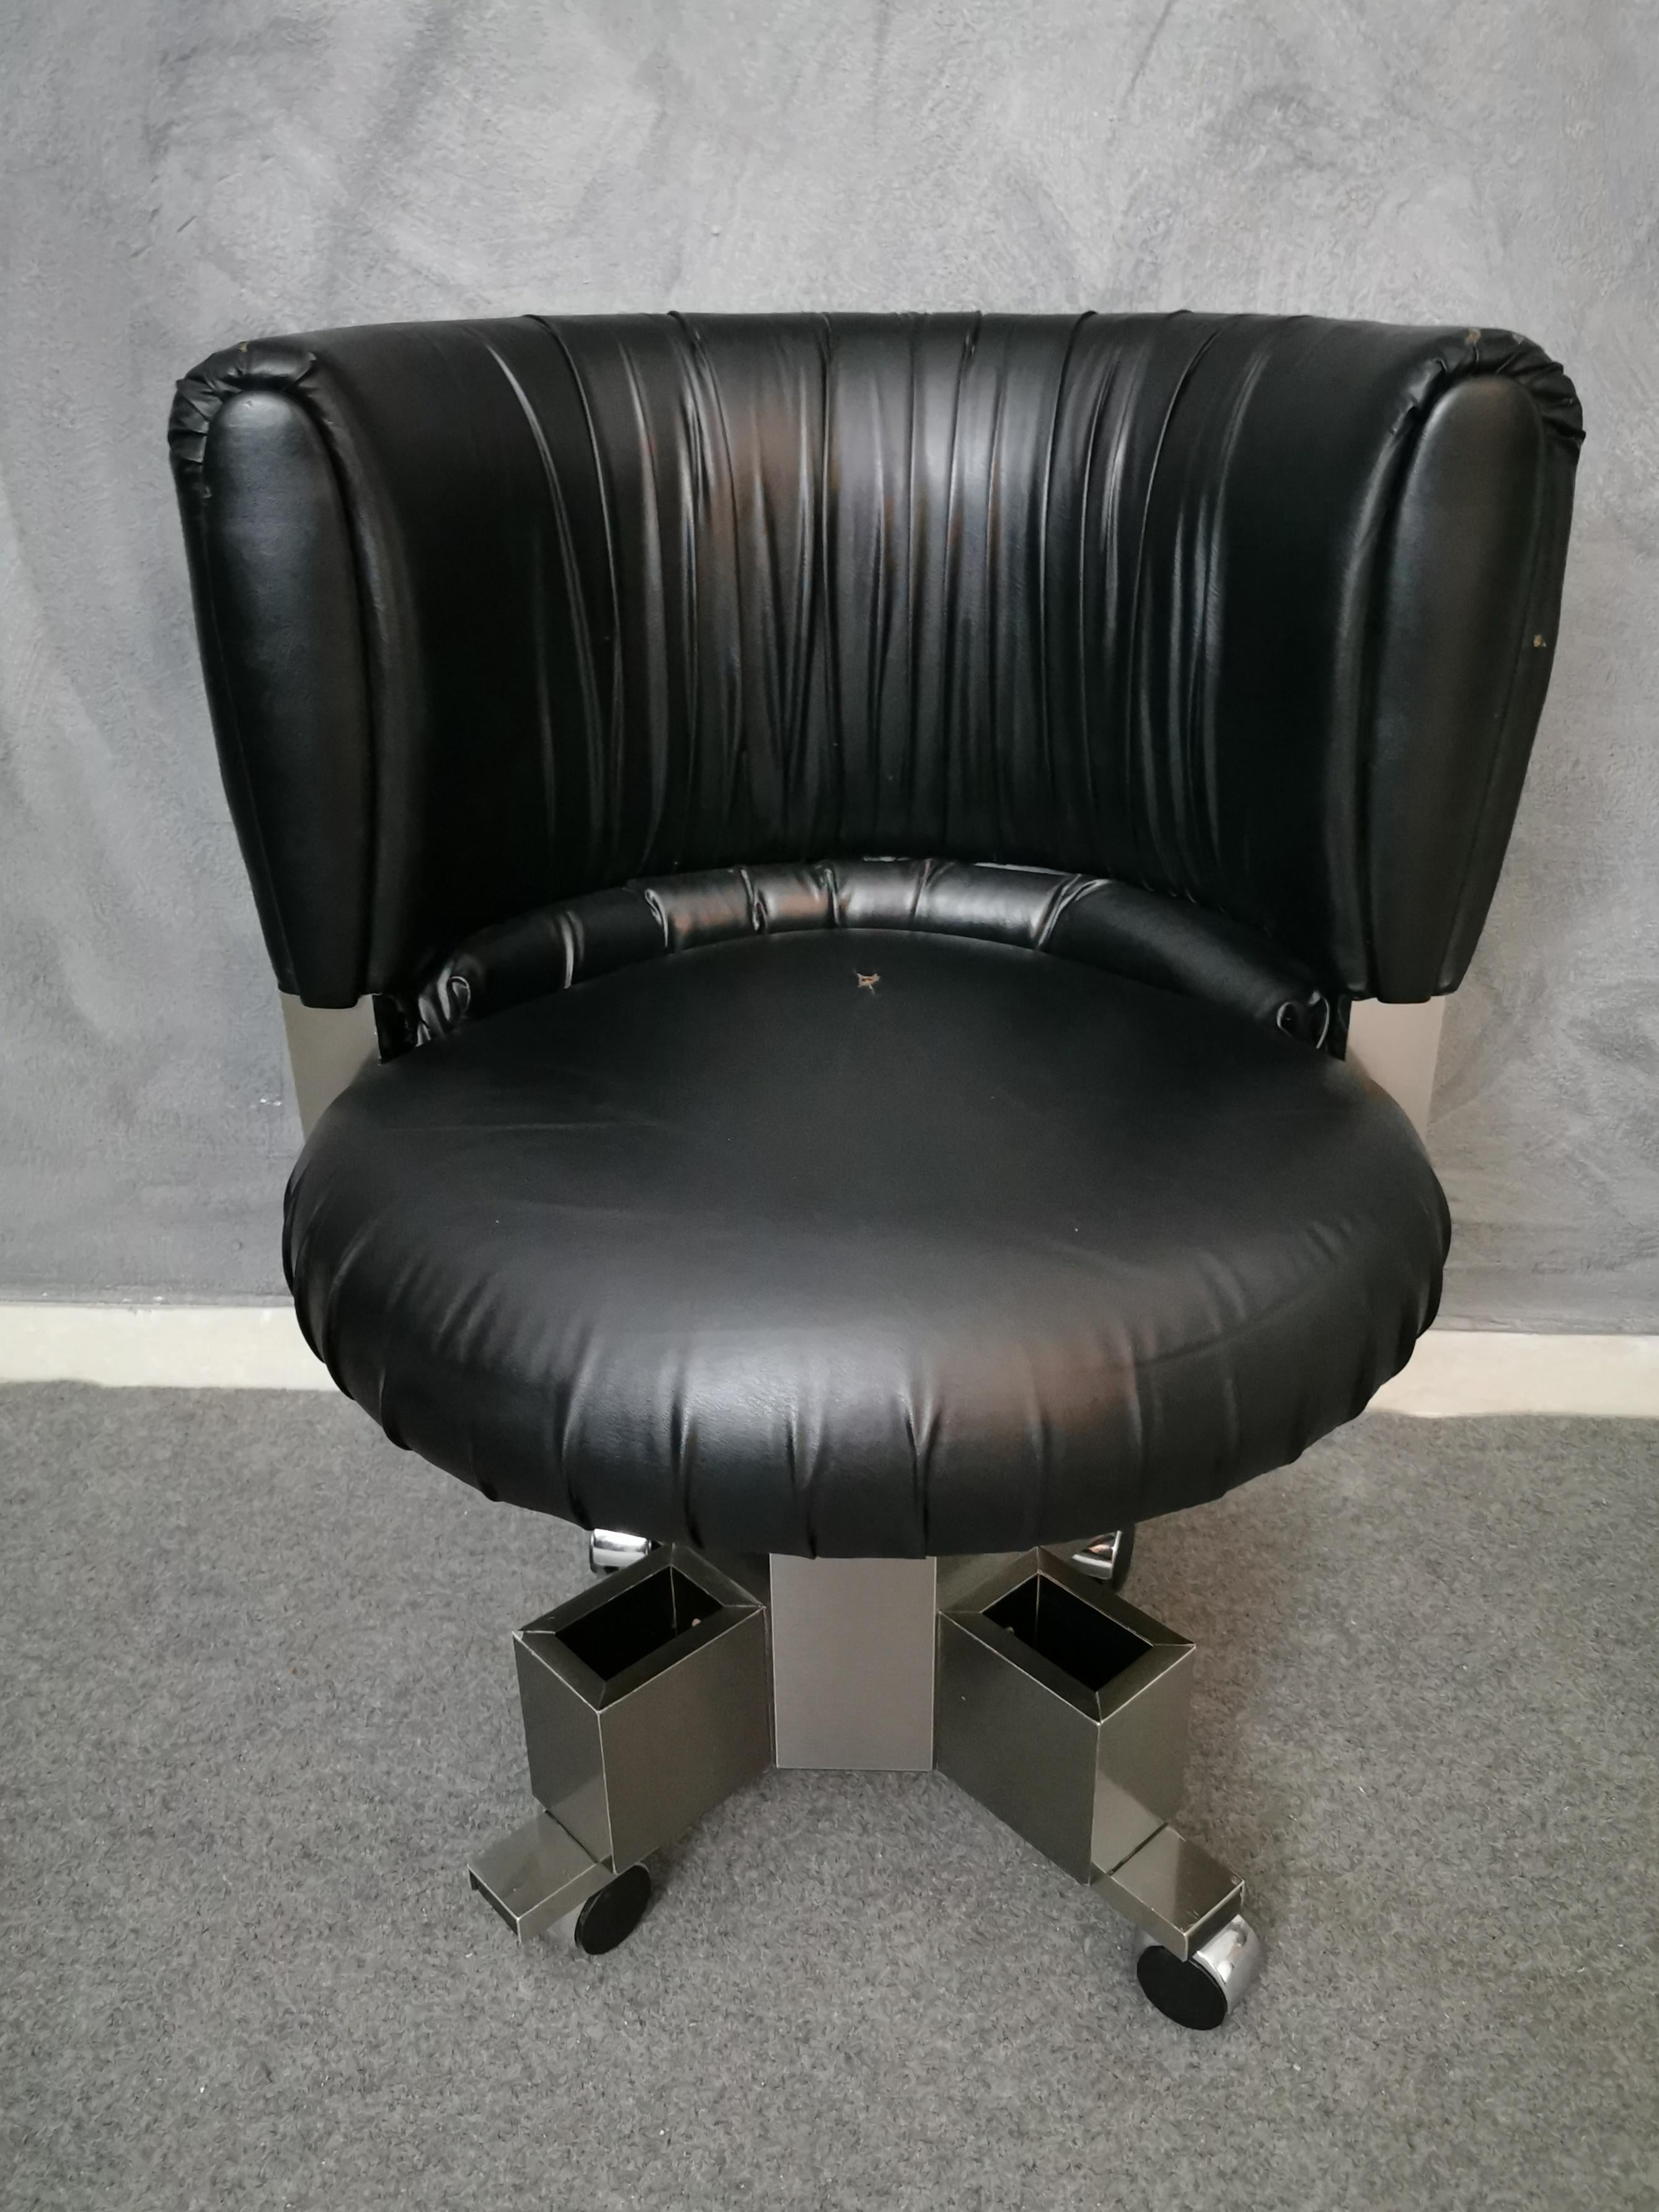 curved armchair in the style of Willy Rizzo adaptable in the office and in elegant environments with black leather seat and back, it has a anodized aluminum band on the back. The feet are in anodized aluminum with a hexagonal shape. Italian